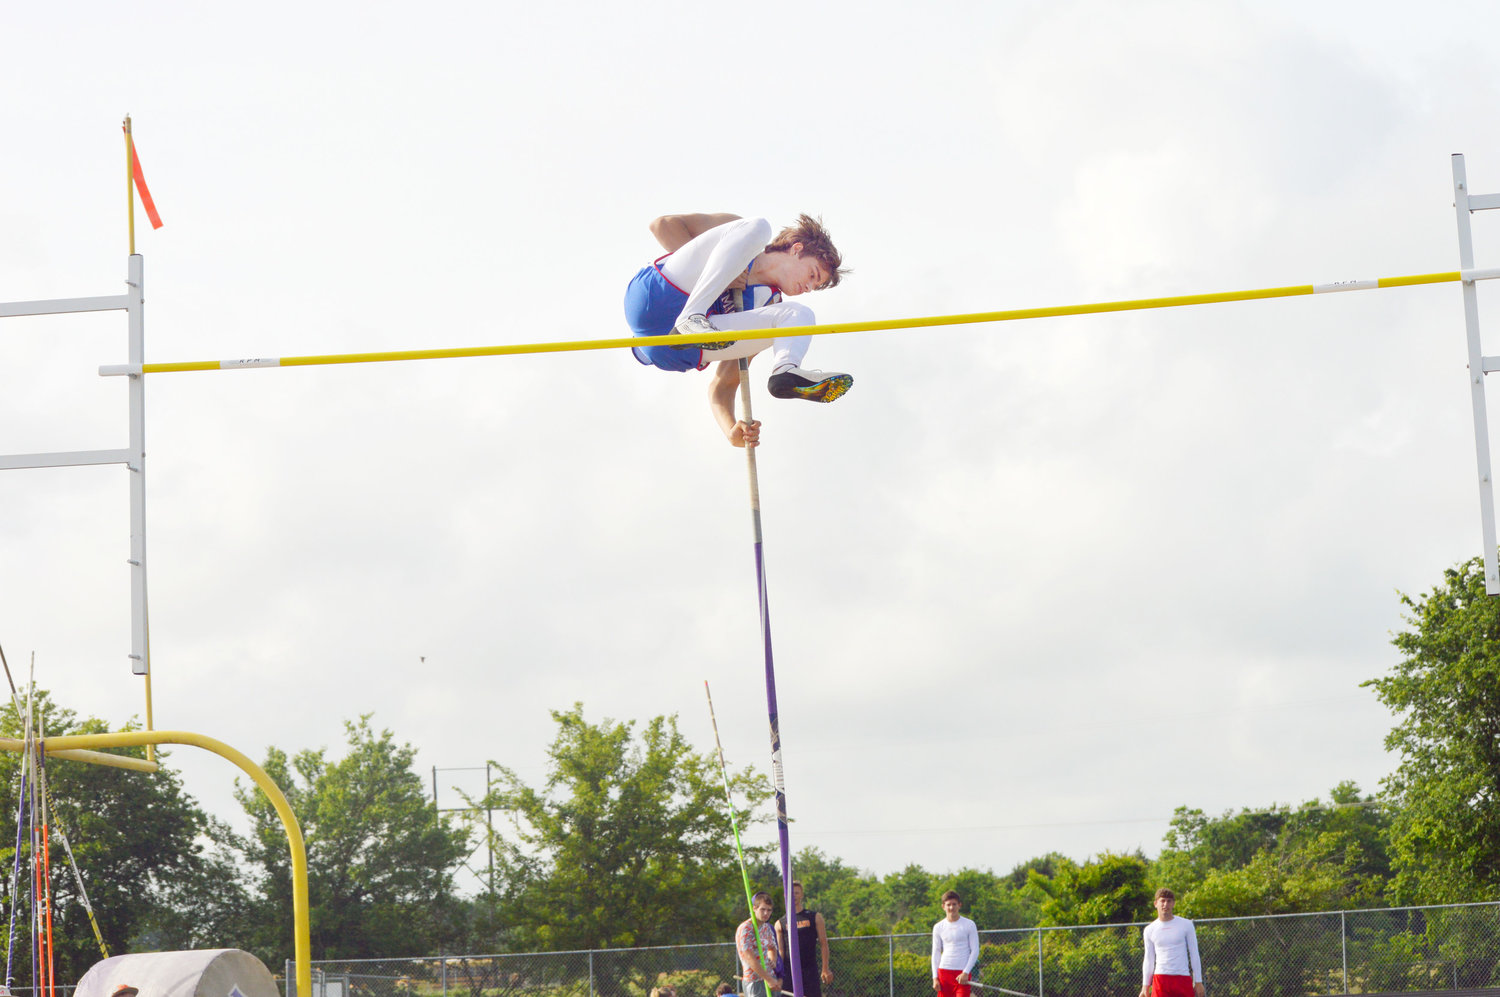 Quitman’s Langdon Bautista flies over the bar during the pole vault competition at the district track meet last week. (Monitor photo by Larry Tucker)